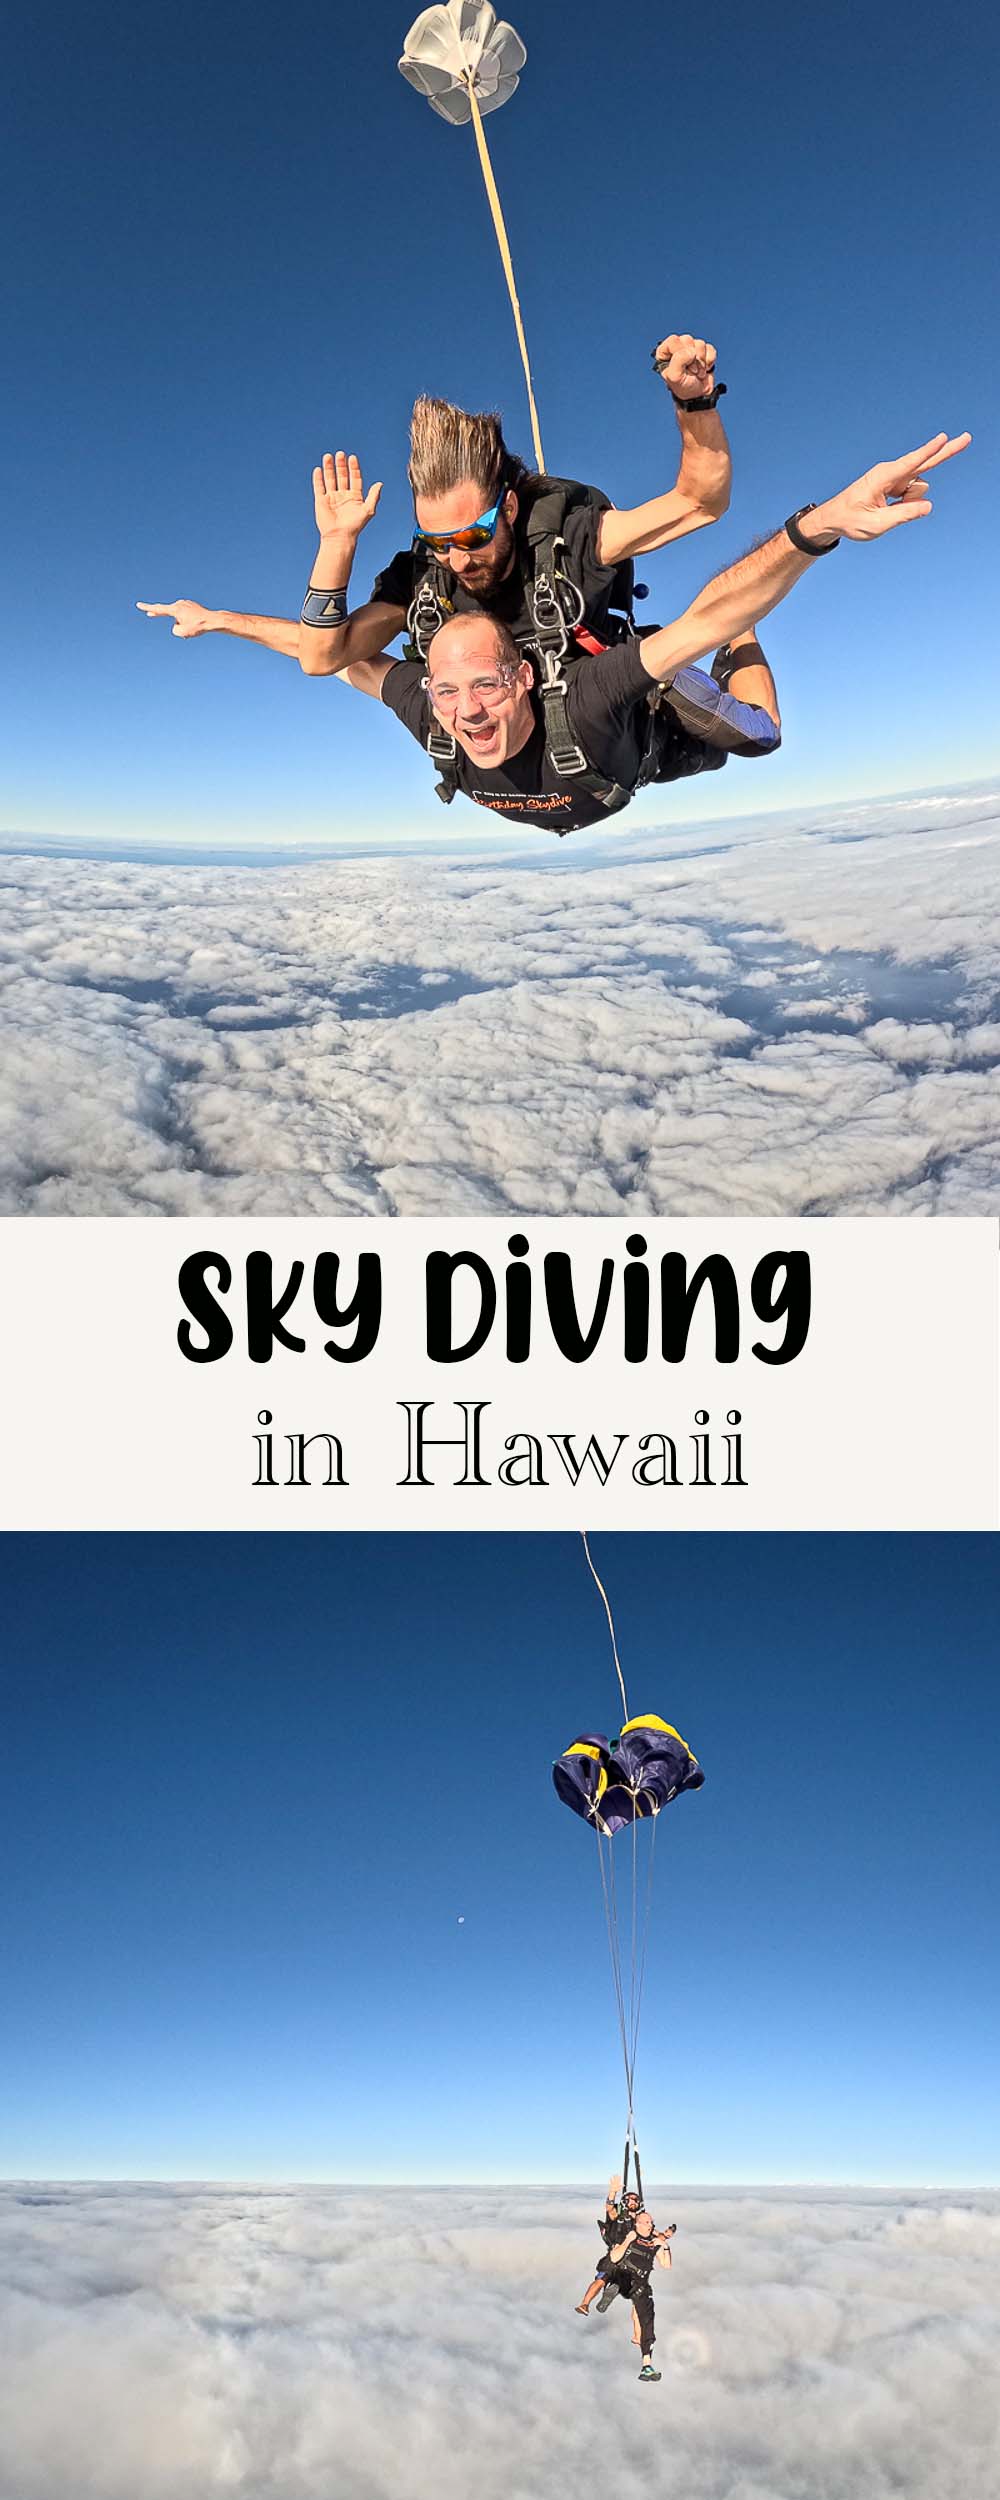 A collage of sky diving pics in Oahu, Hawaii.